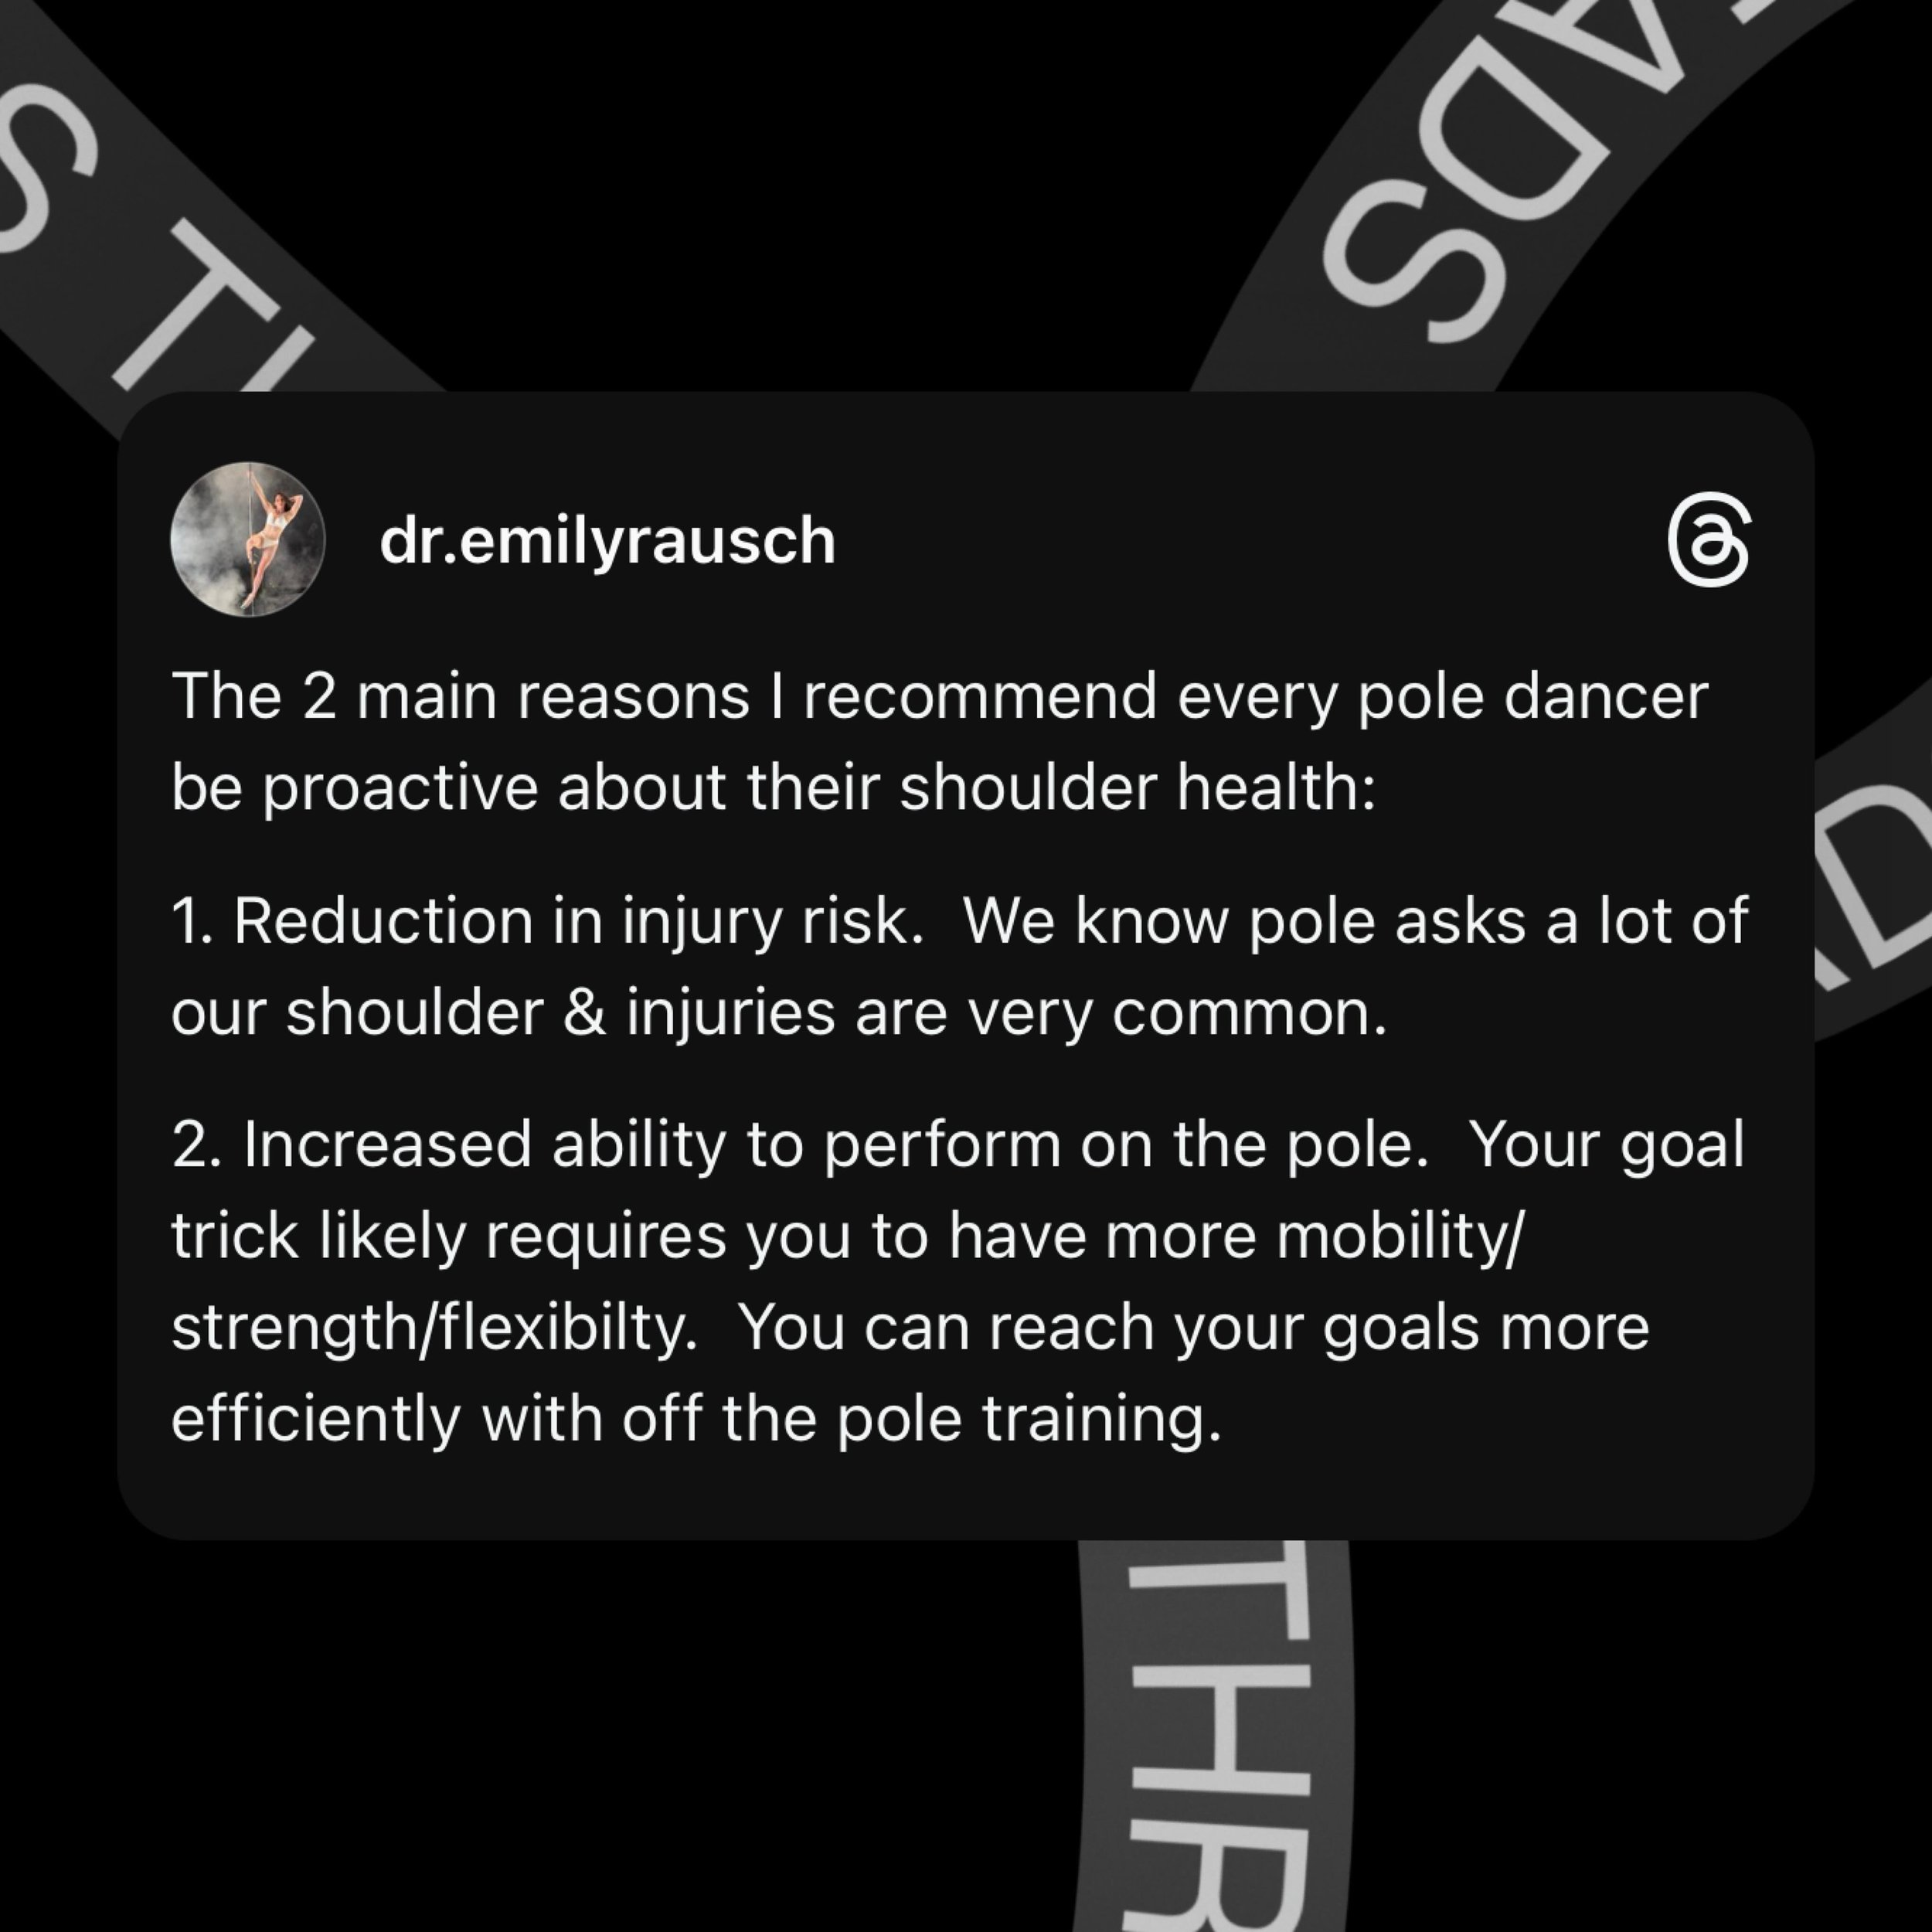 Meatsuit Maintenance/Prehab isn&rsquo;t sexy. 

It&rsquo;s not necessarily the most ✨fun✨ thing to spend your precious time doing. 

Most pole dancer would rather spend their time pole dancing. 

Shocking I know. 

✨If you want to be proactive about 